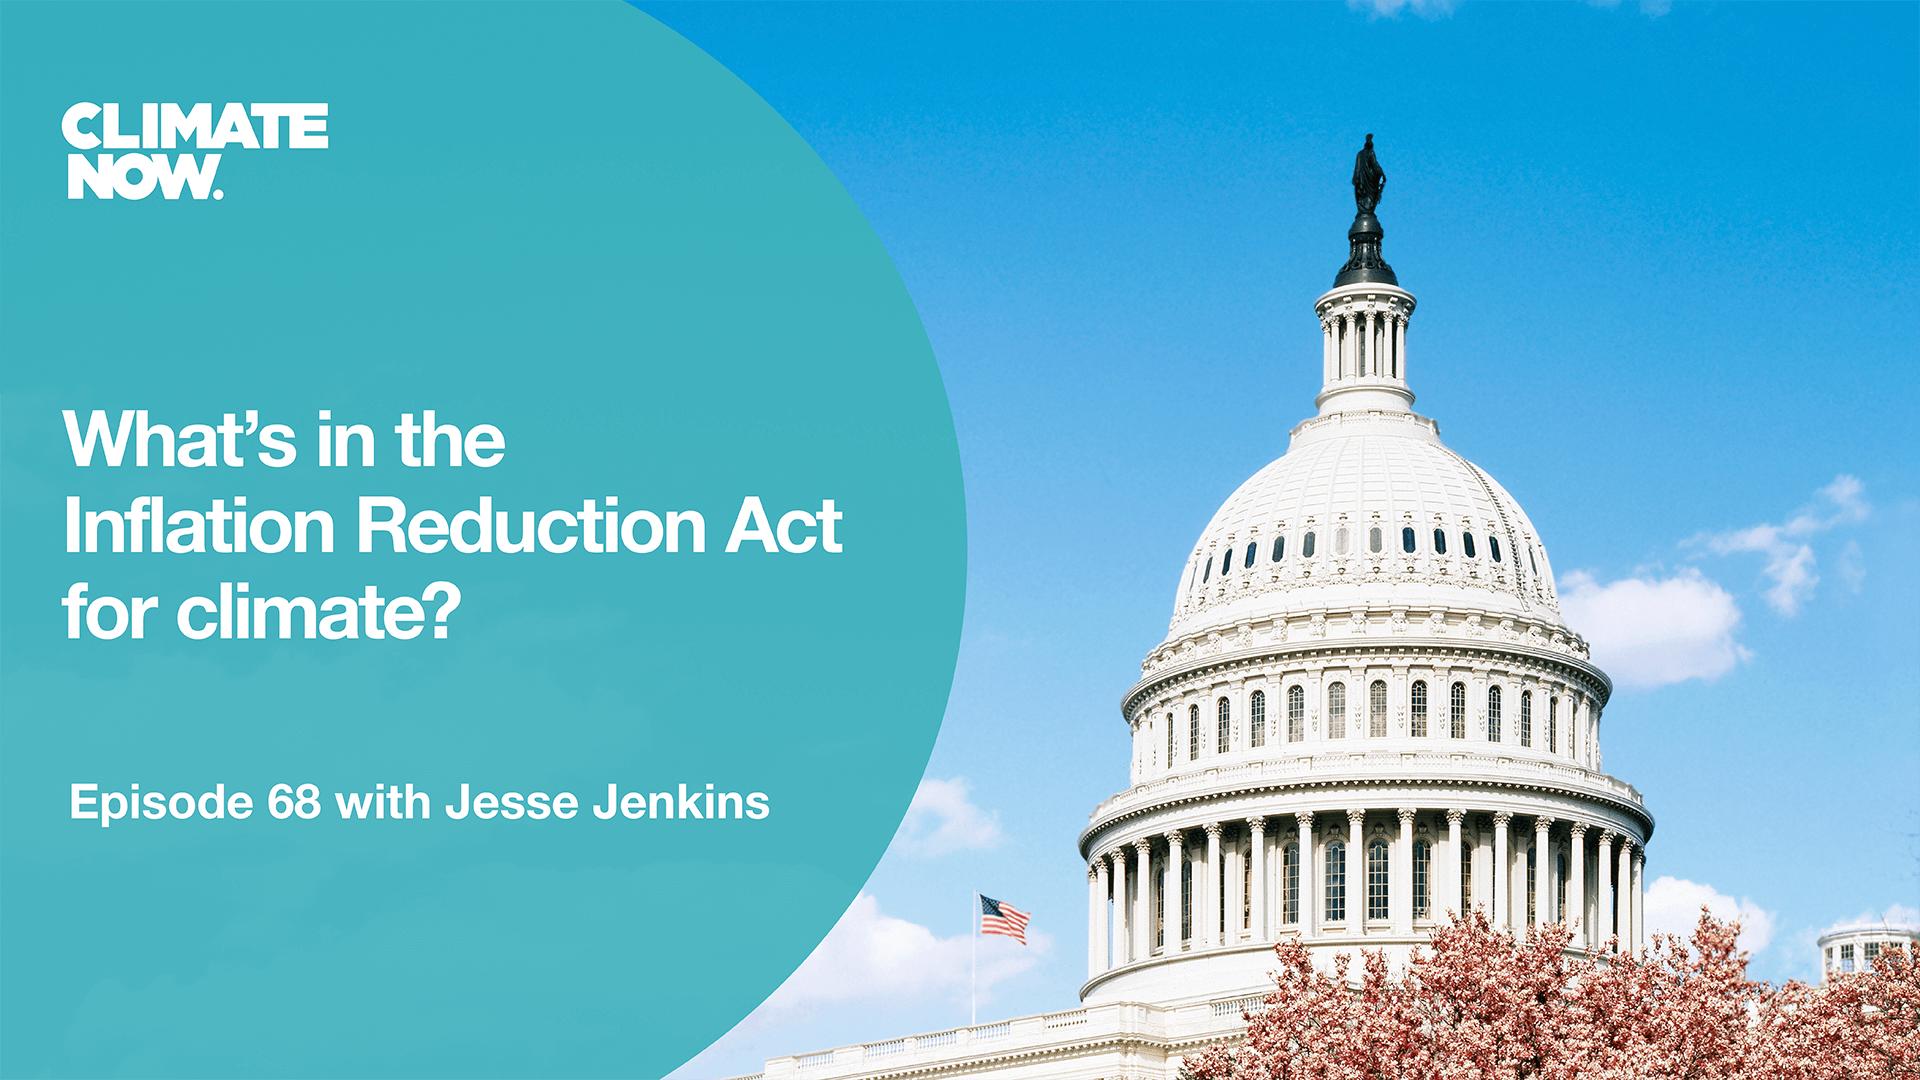 What's in the Inflation Reduction Act (IRA) of 2022